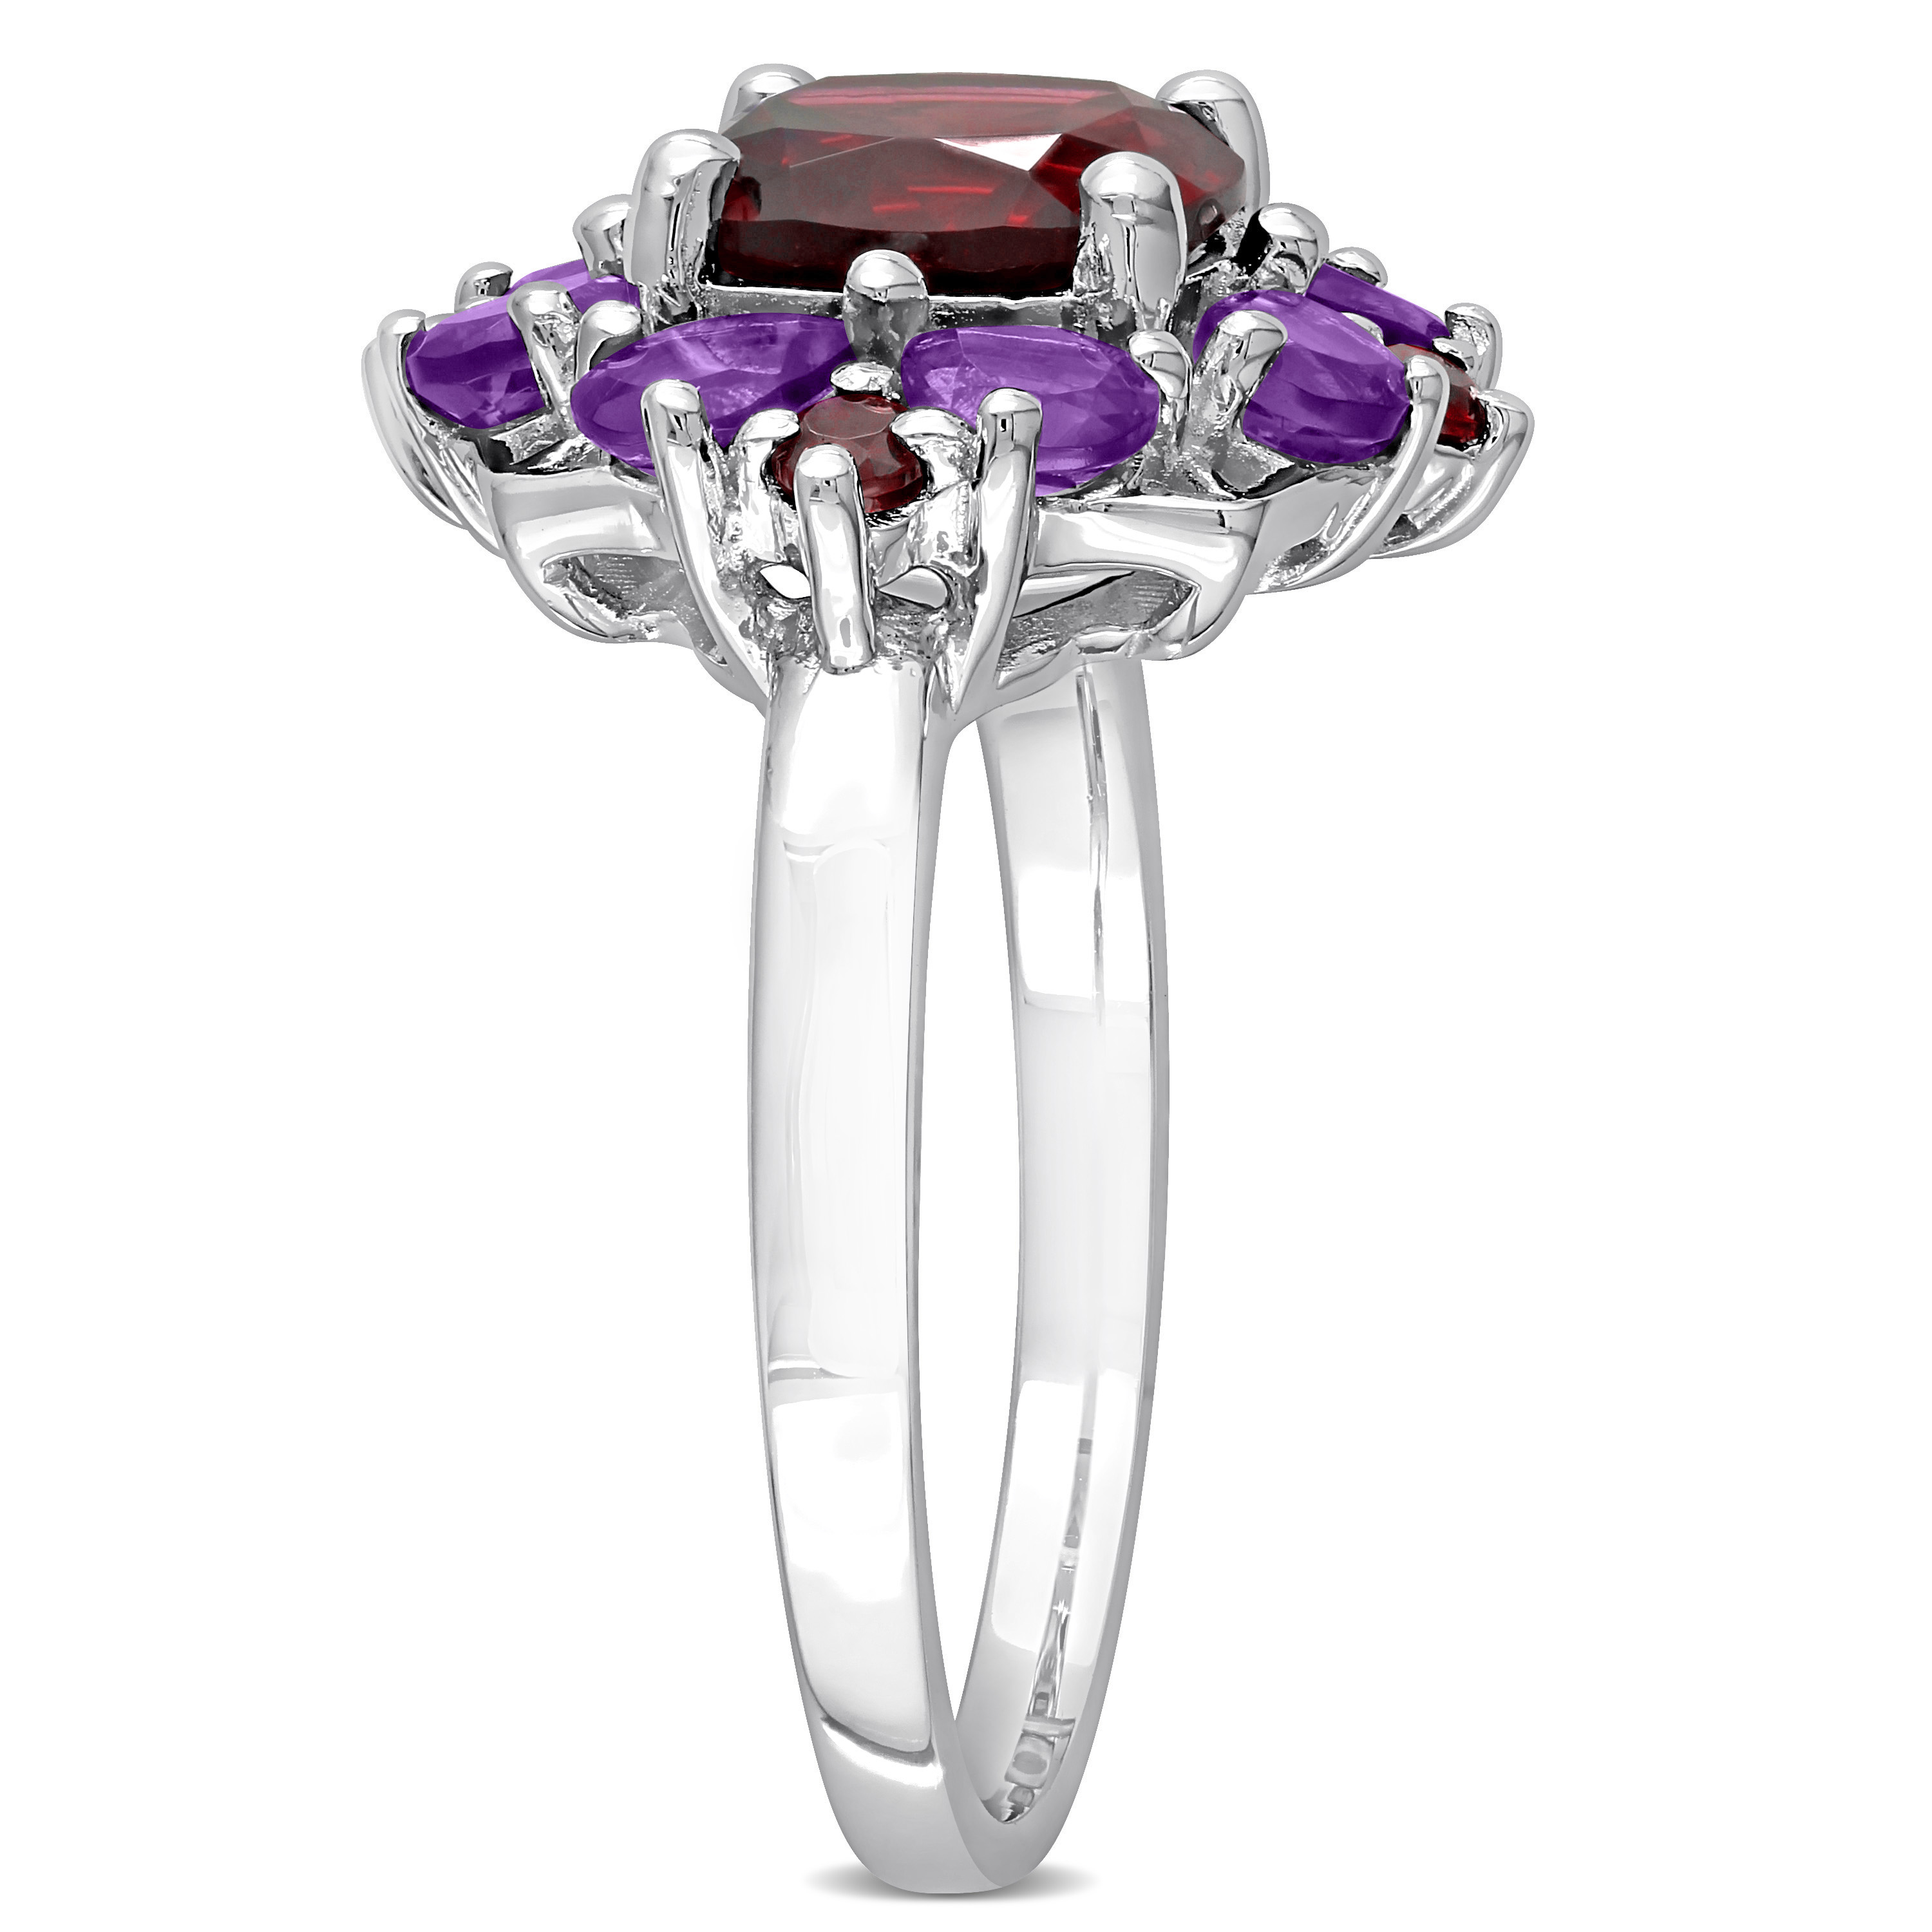 4 2/5 CT TGW Garnet and African Amethyst Quatrefoil Floral Ring in Sterling Silver